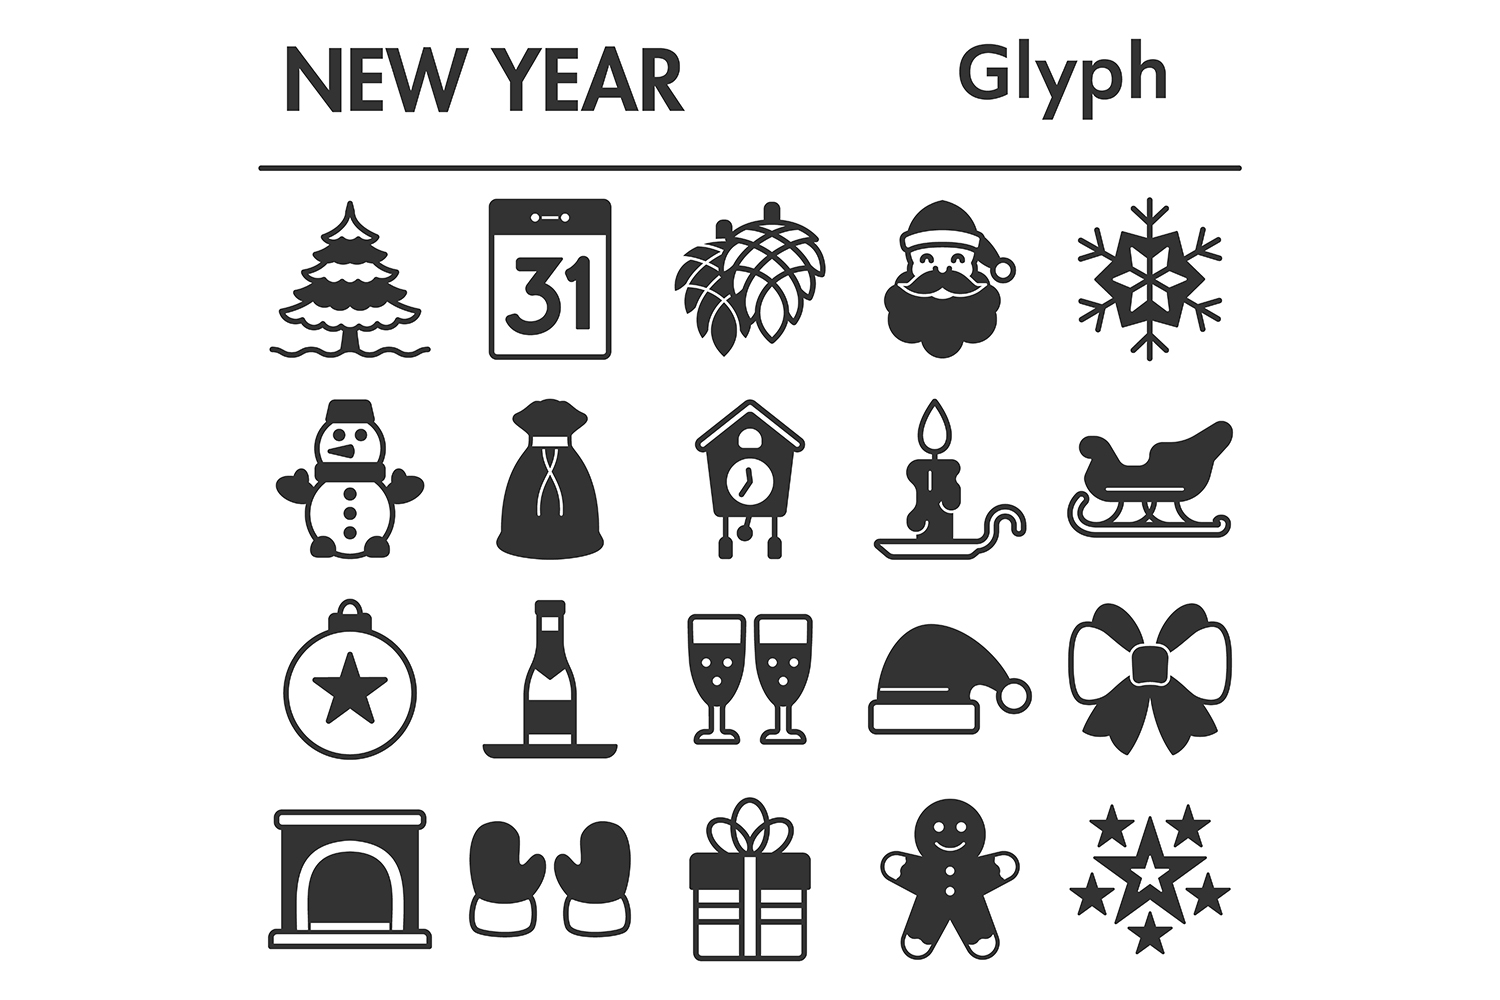 New Year icons set, glyph style pinterest preview image.